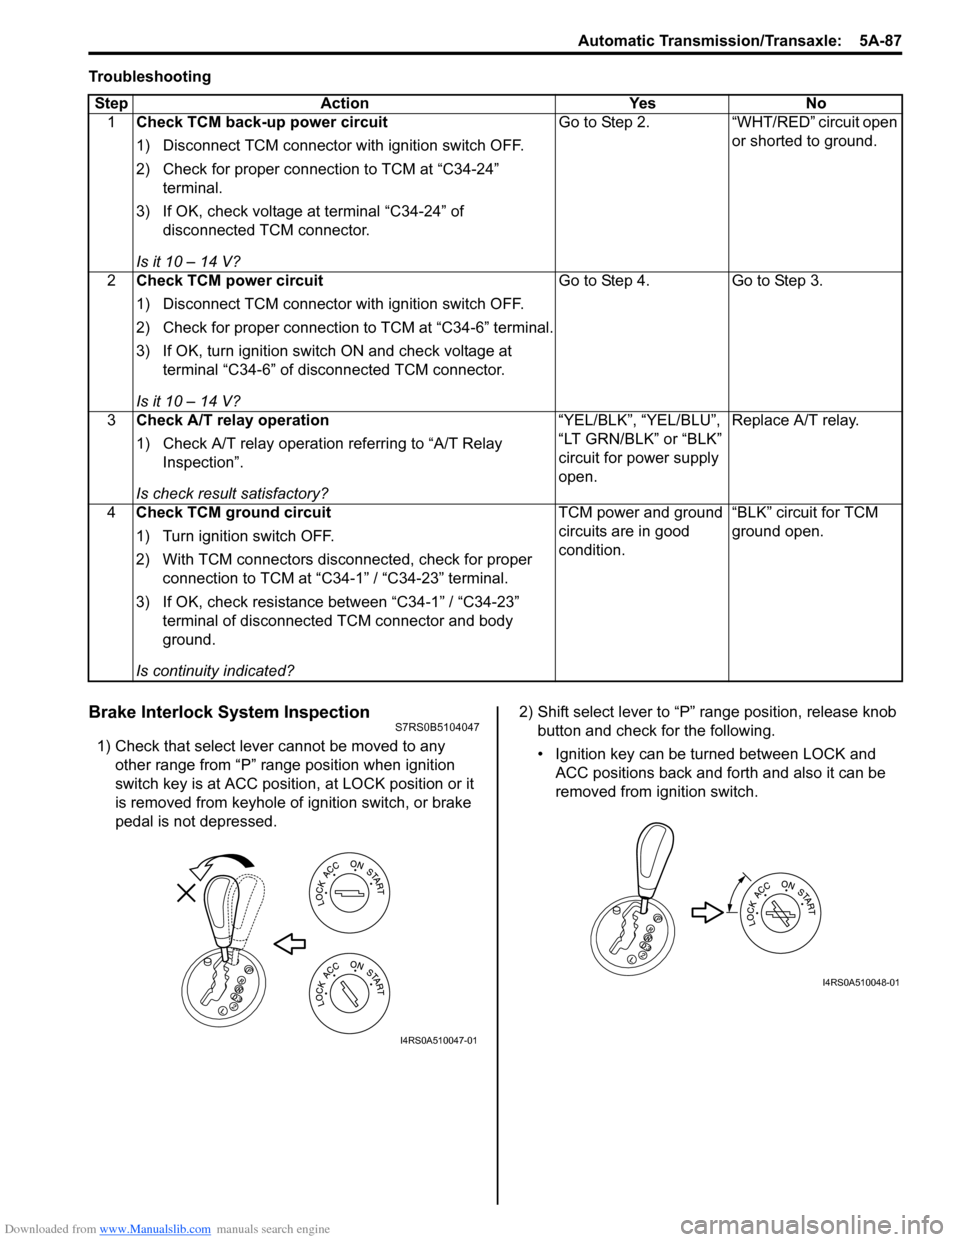 SUZUKI SWIFT 2007 2.G Service Workshop Manual Downloaded from www.Manualslib.com manuals search engine Automatic Transmission/Transaxle:  5A-87
Troubleshooting
Brake Interlock System InspectionS7RS0B5104047
1) Check that select lever cannot be mo